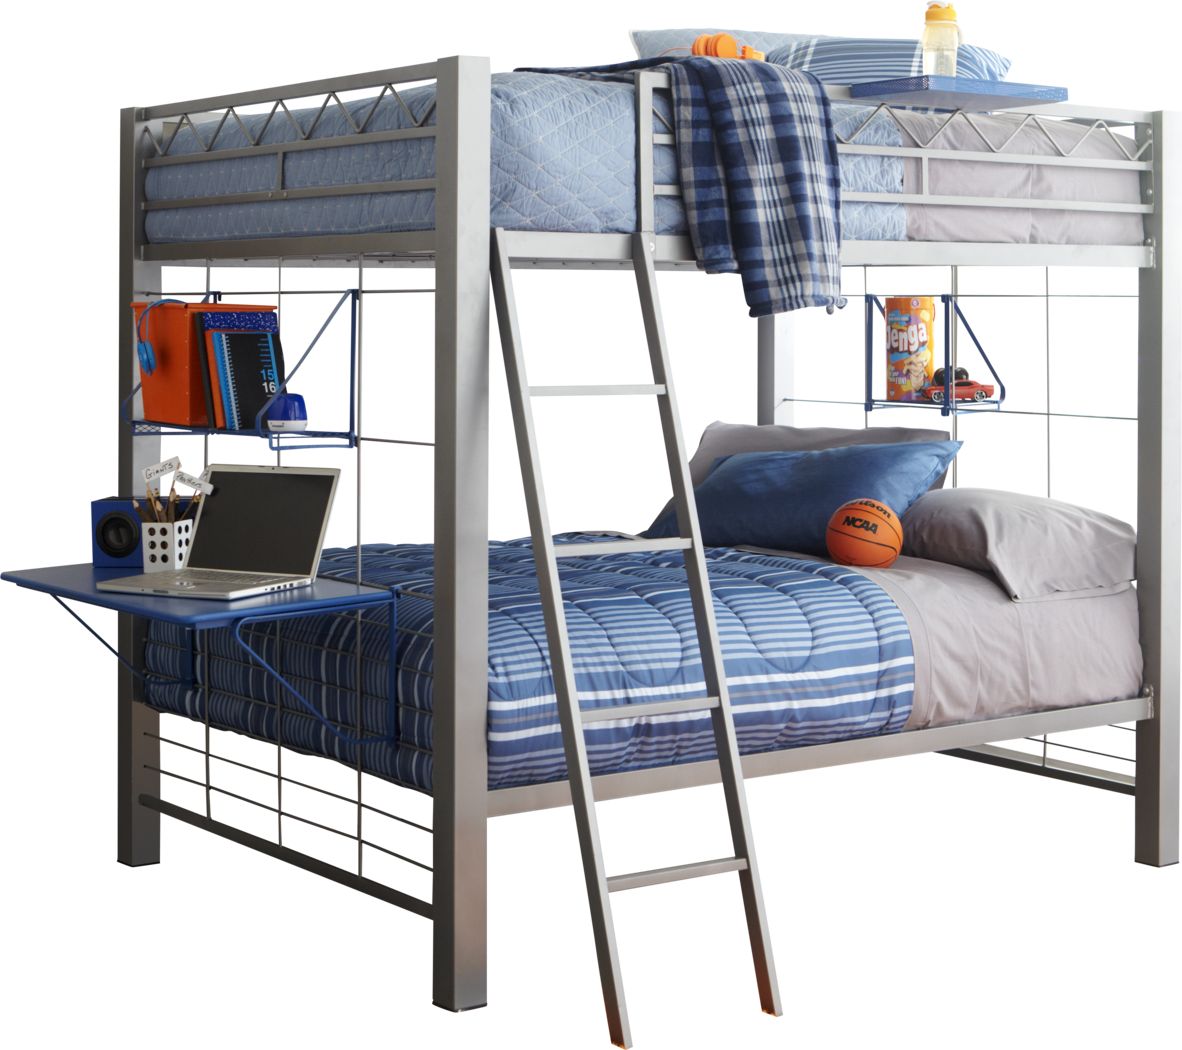 Go Bunk Bed With Stairs Yasserchemicals, Rooms To Go Bunk Beds